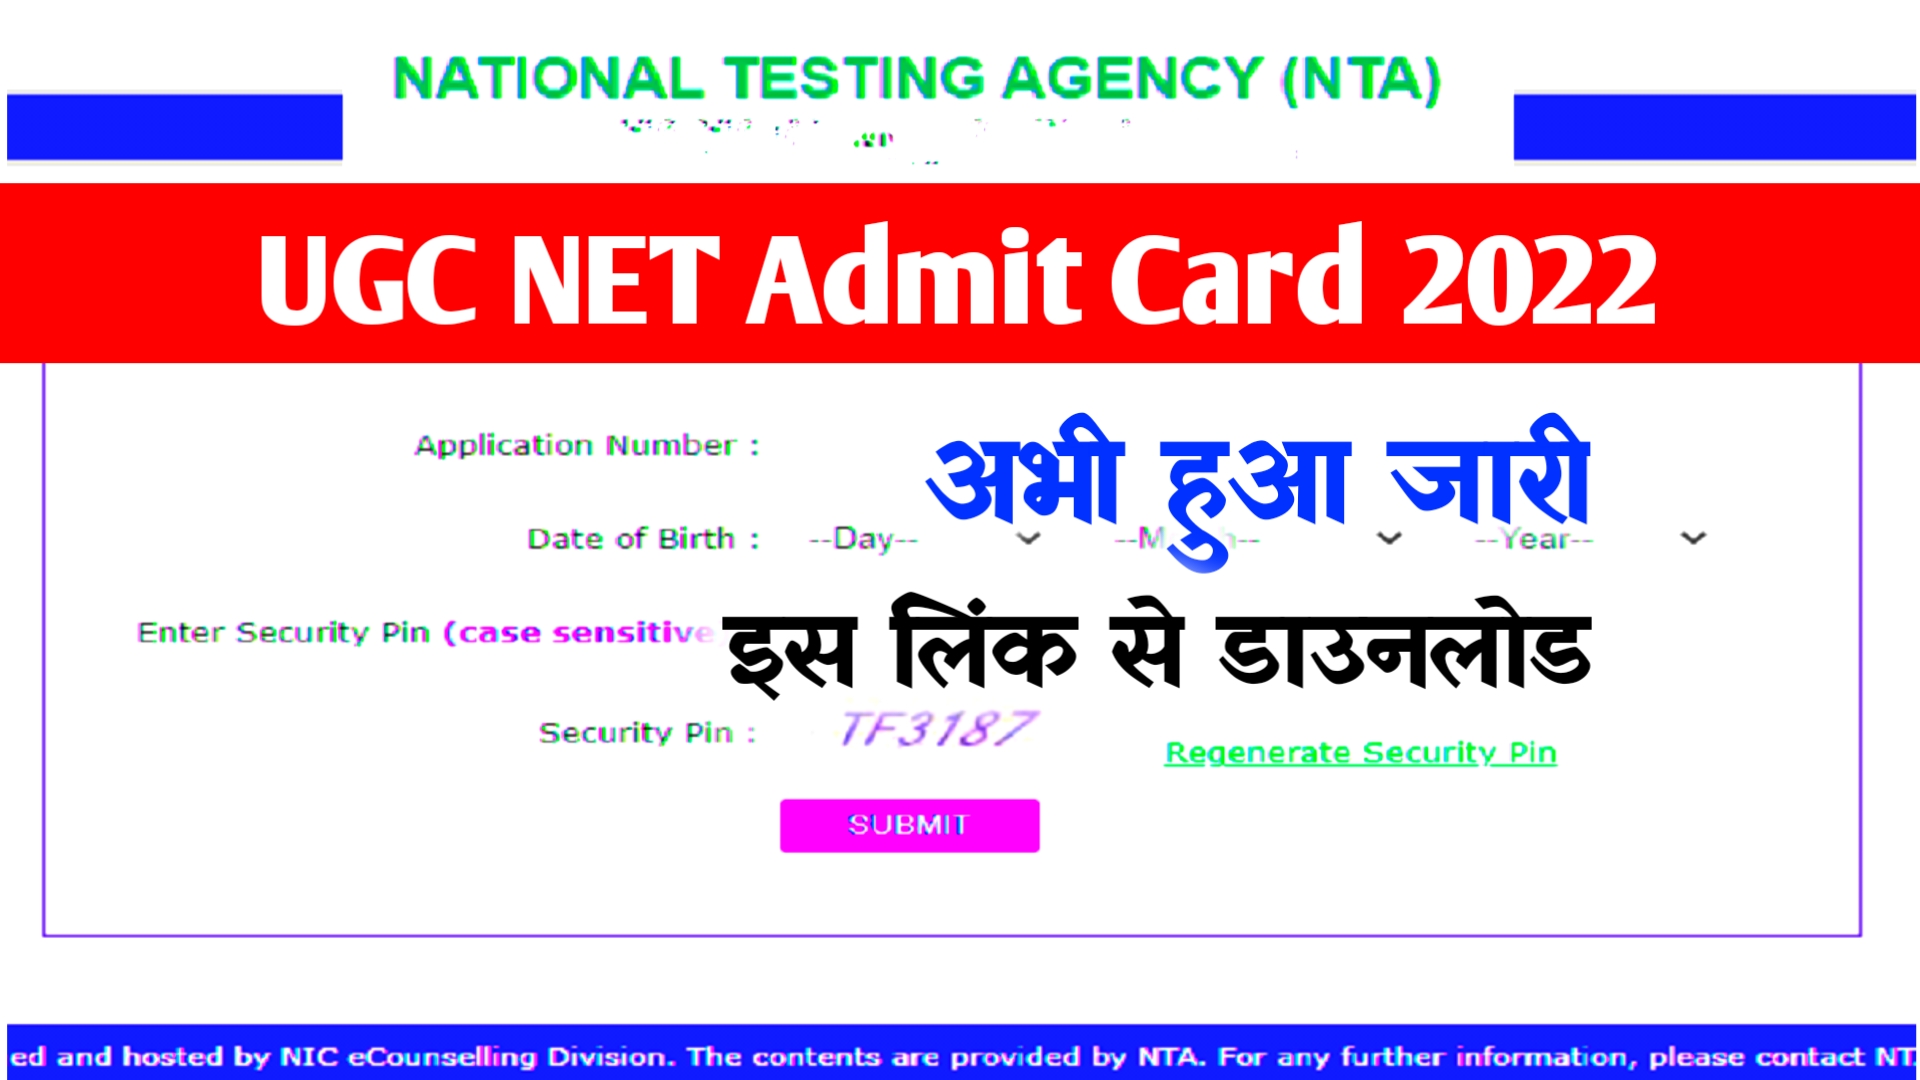 UGC NET Admit Card 2022 Download Link ~ Check Now @ugcnet.nta.nic.in